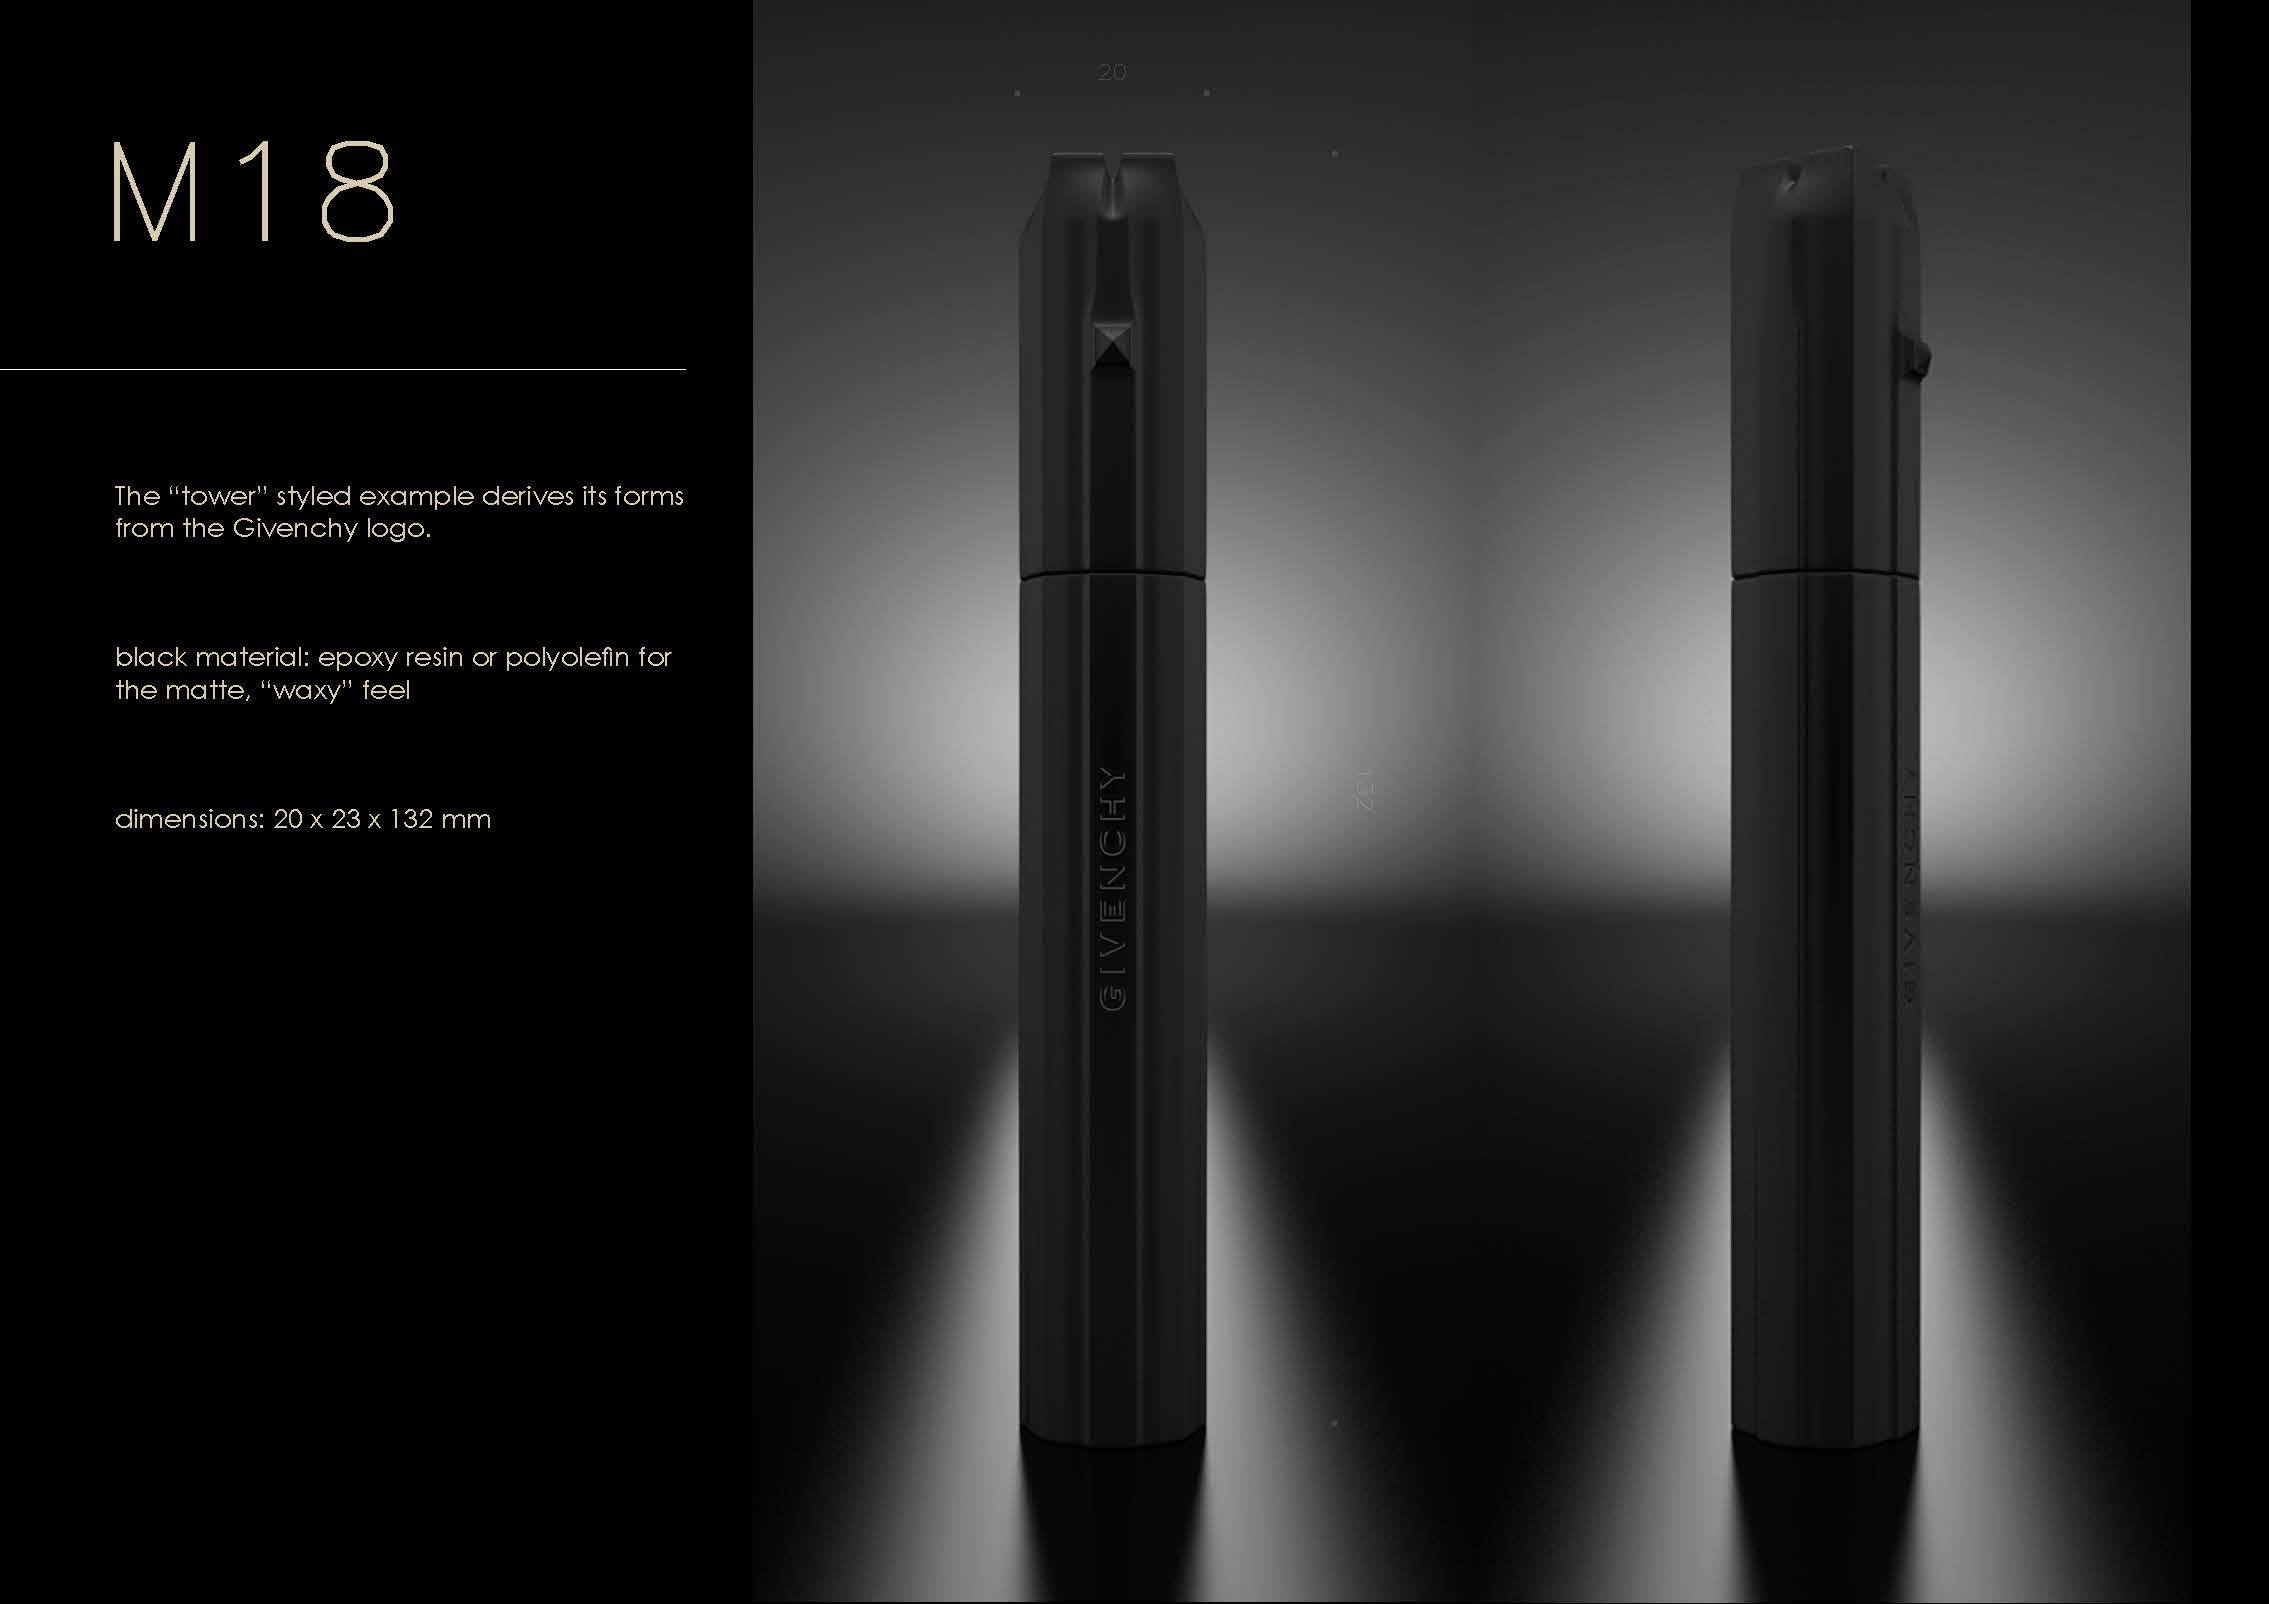 Givenchy mascaras w dimensions, I_Page_40.jpg